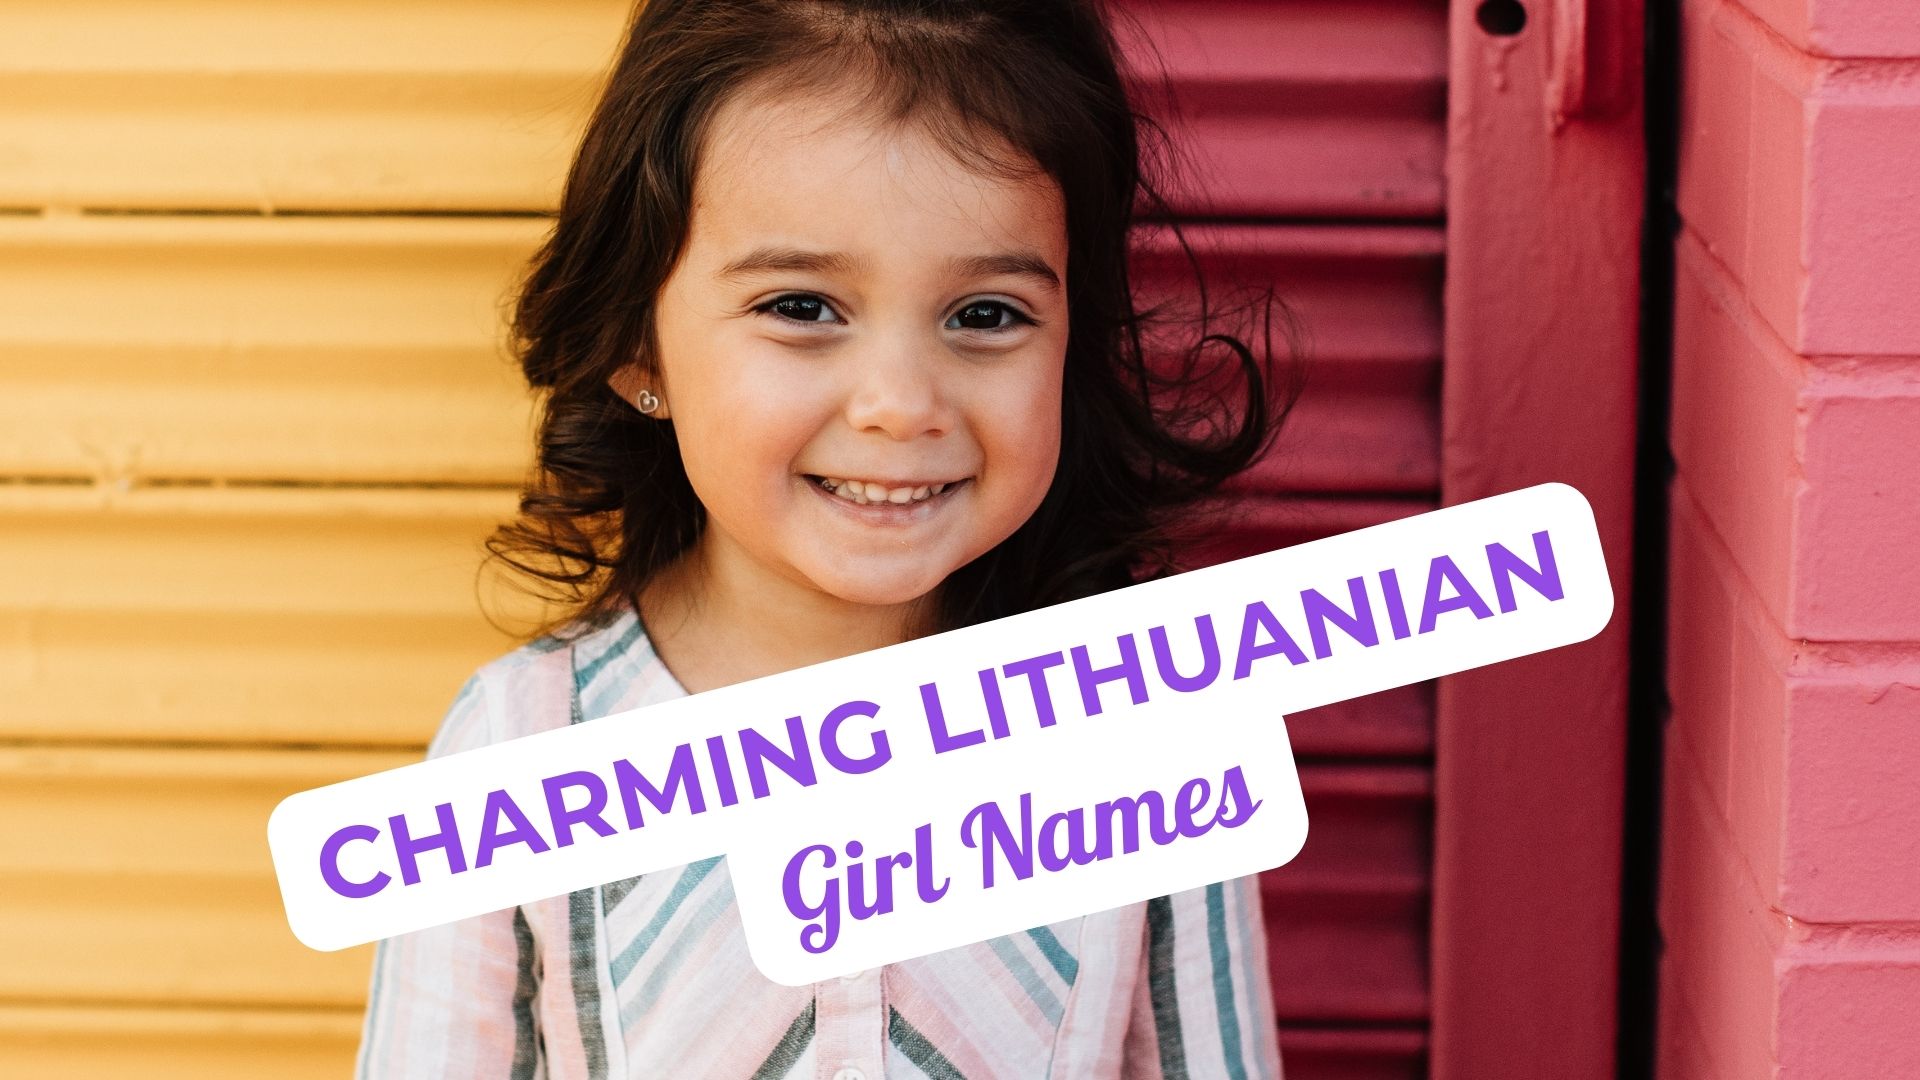 Charming Lithuanian Girl Names for Your Baby